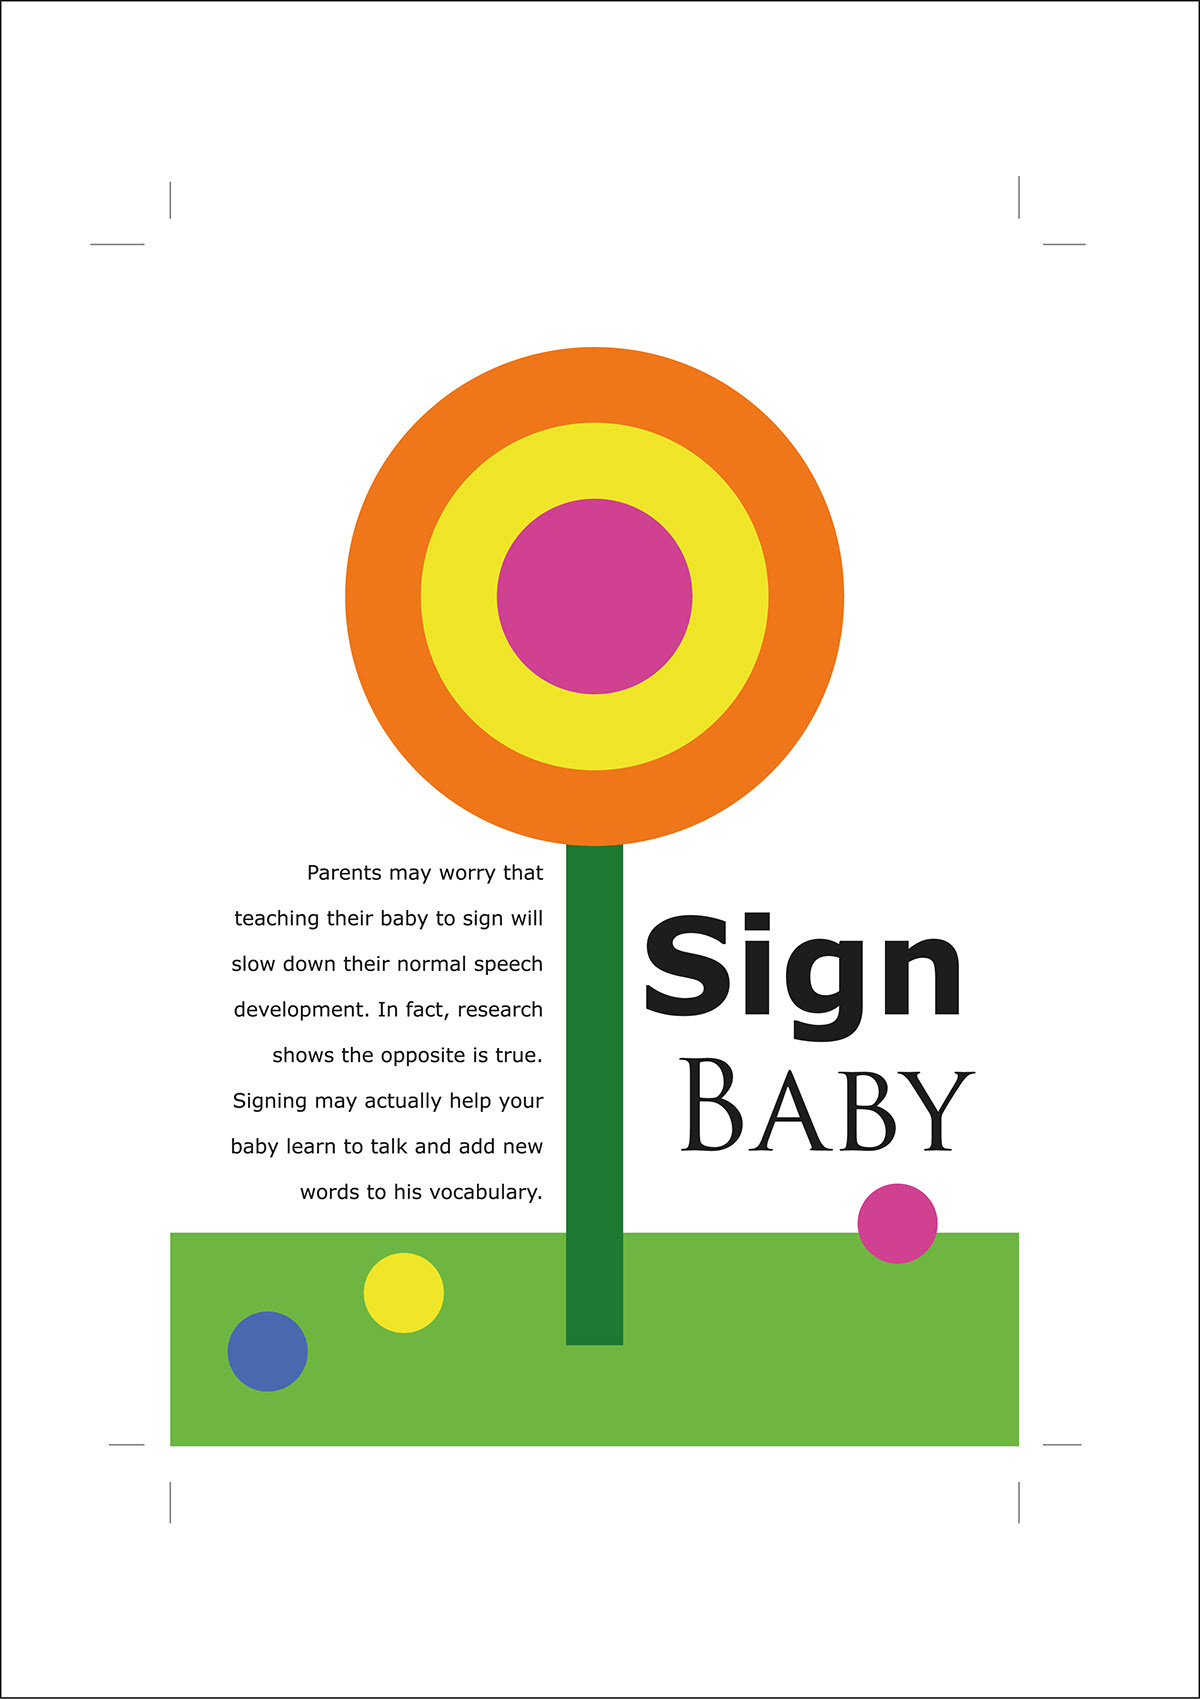 baby  sign  Magazine   article  colourful